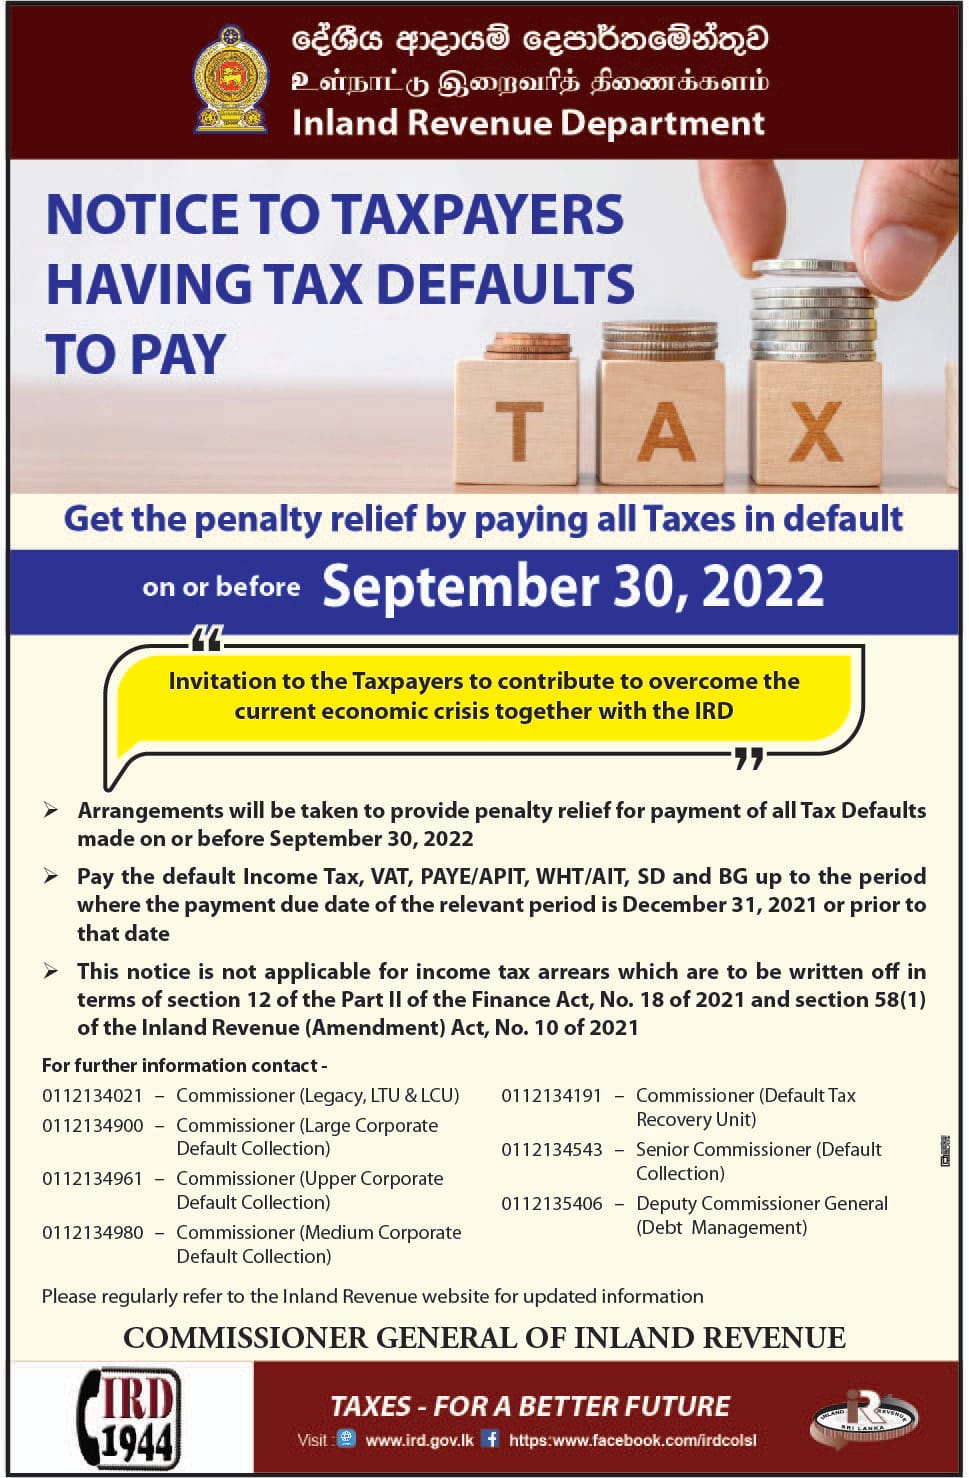 tax-advisor-instant-tax-solutions-penalty-relief-time-extension-for-taxes-due